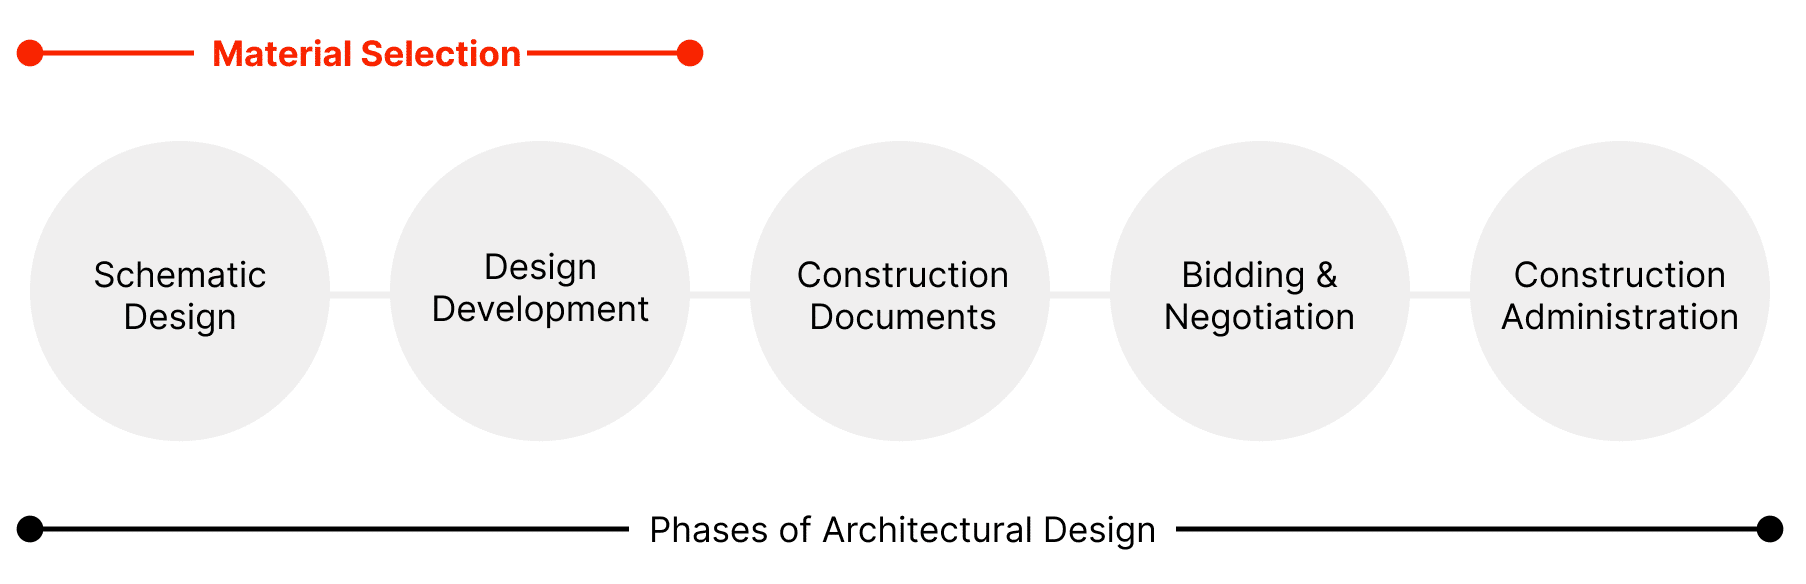 Figure 1: The Five Phases of Architectural Design defined by the AIA.